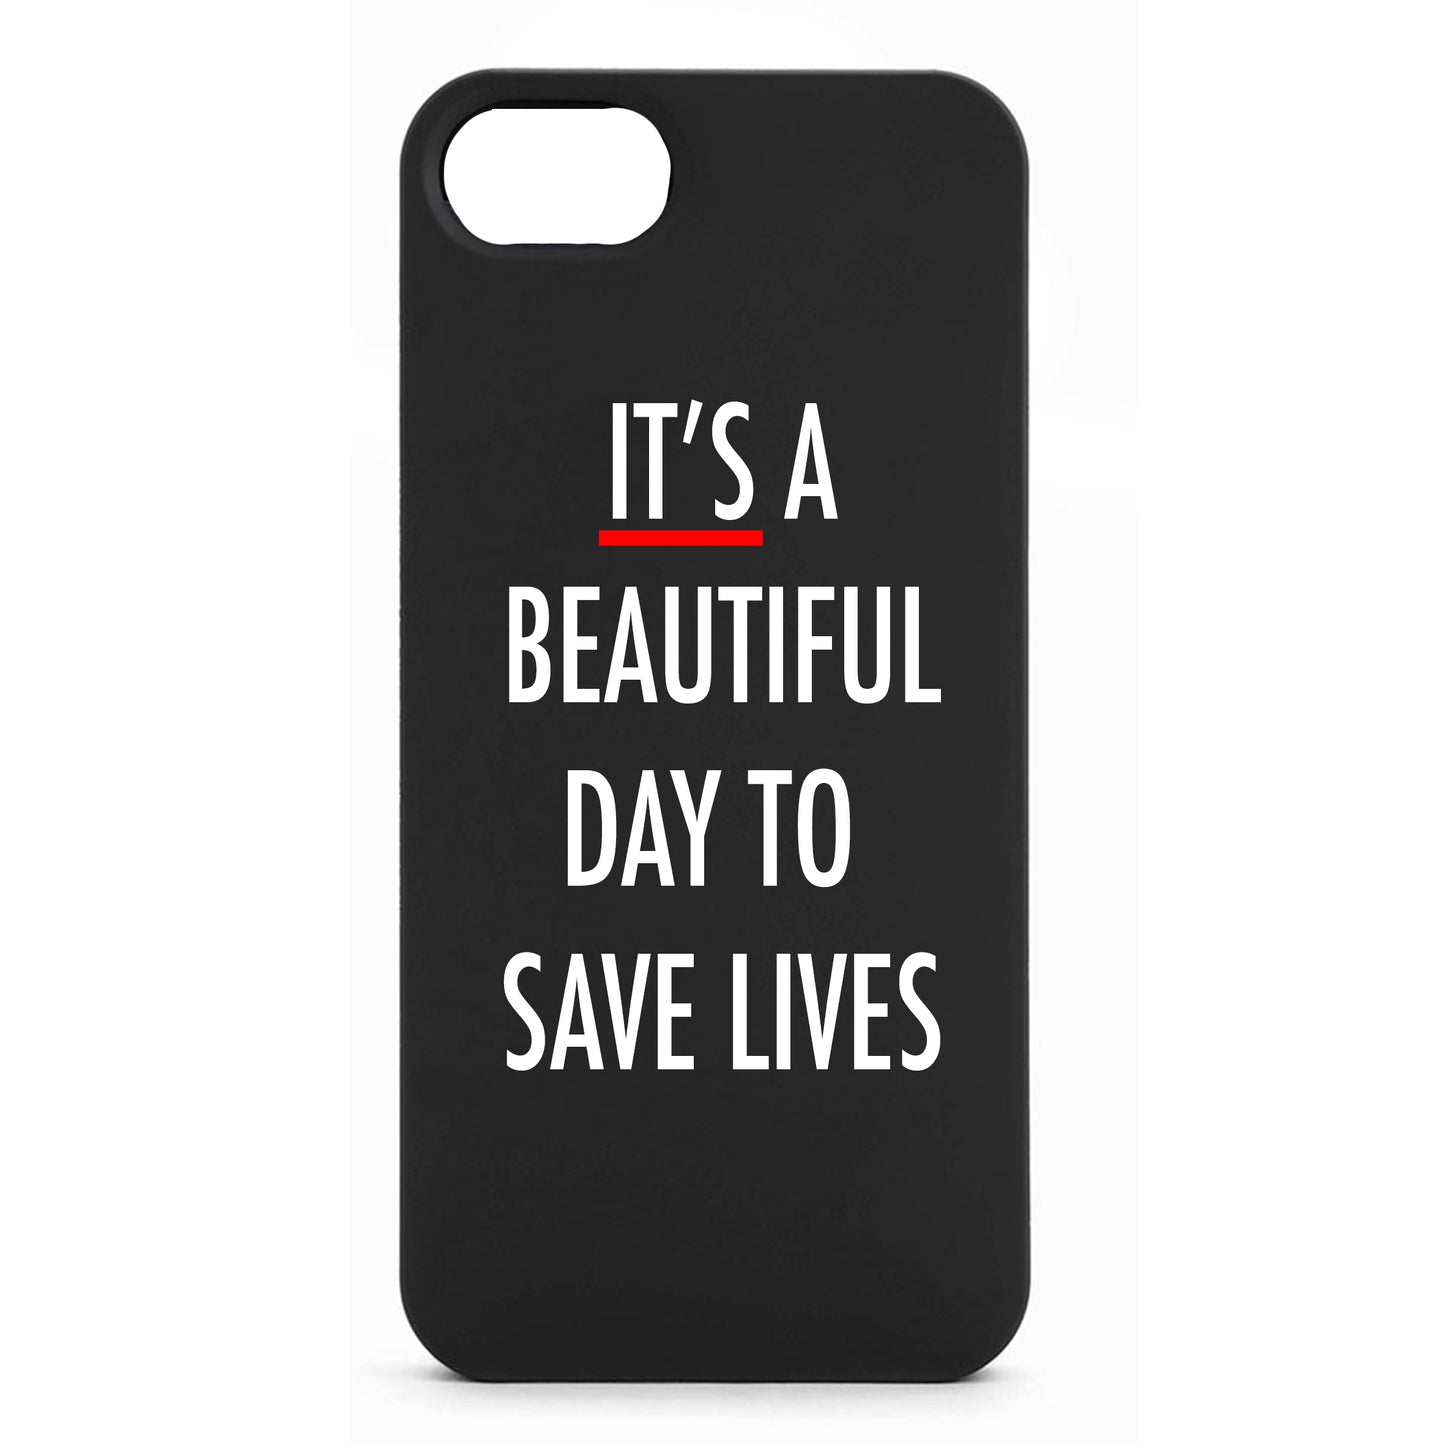 'It's a Beautiful Day' Phone Case - iPhone 5 & 5s - Black